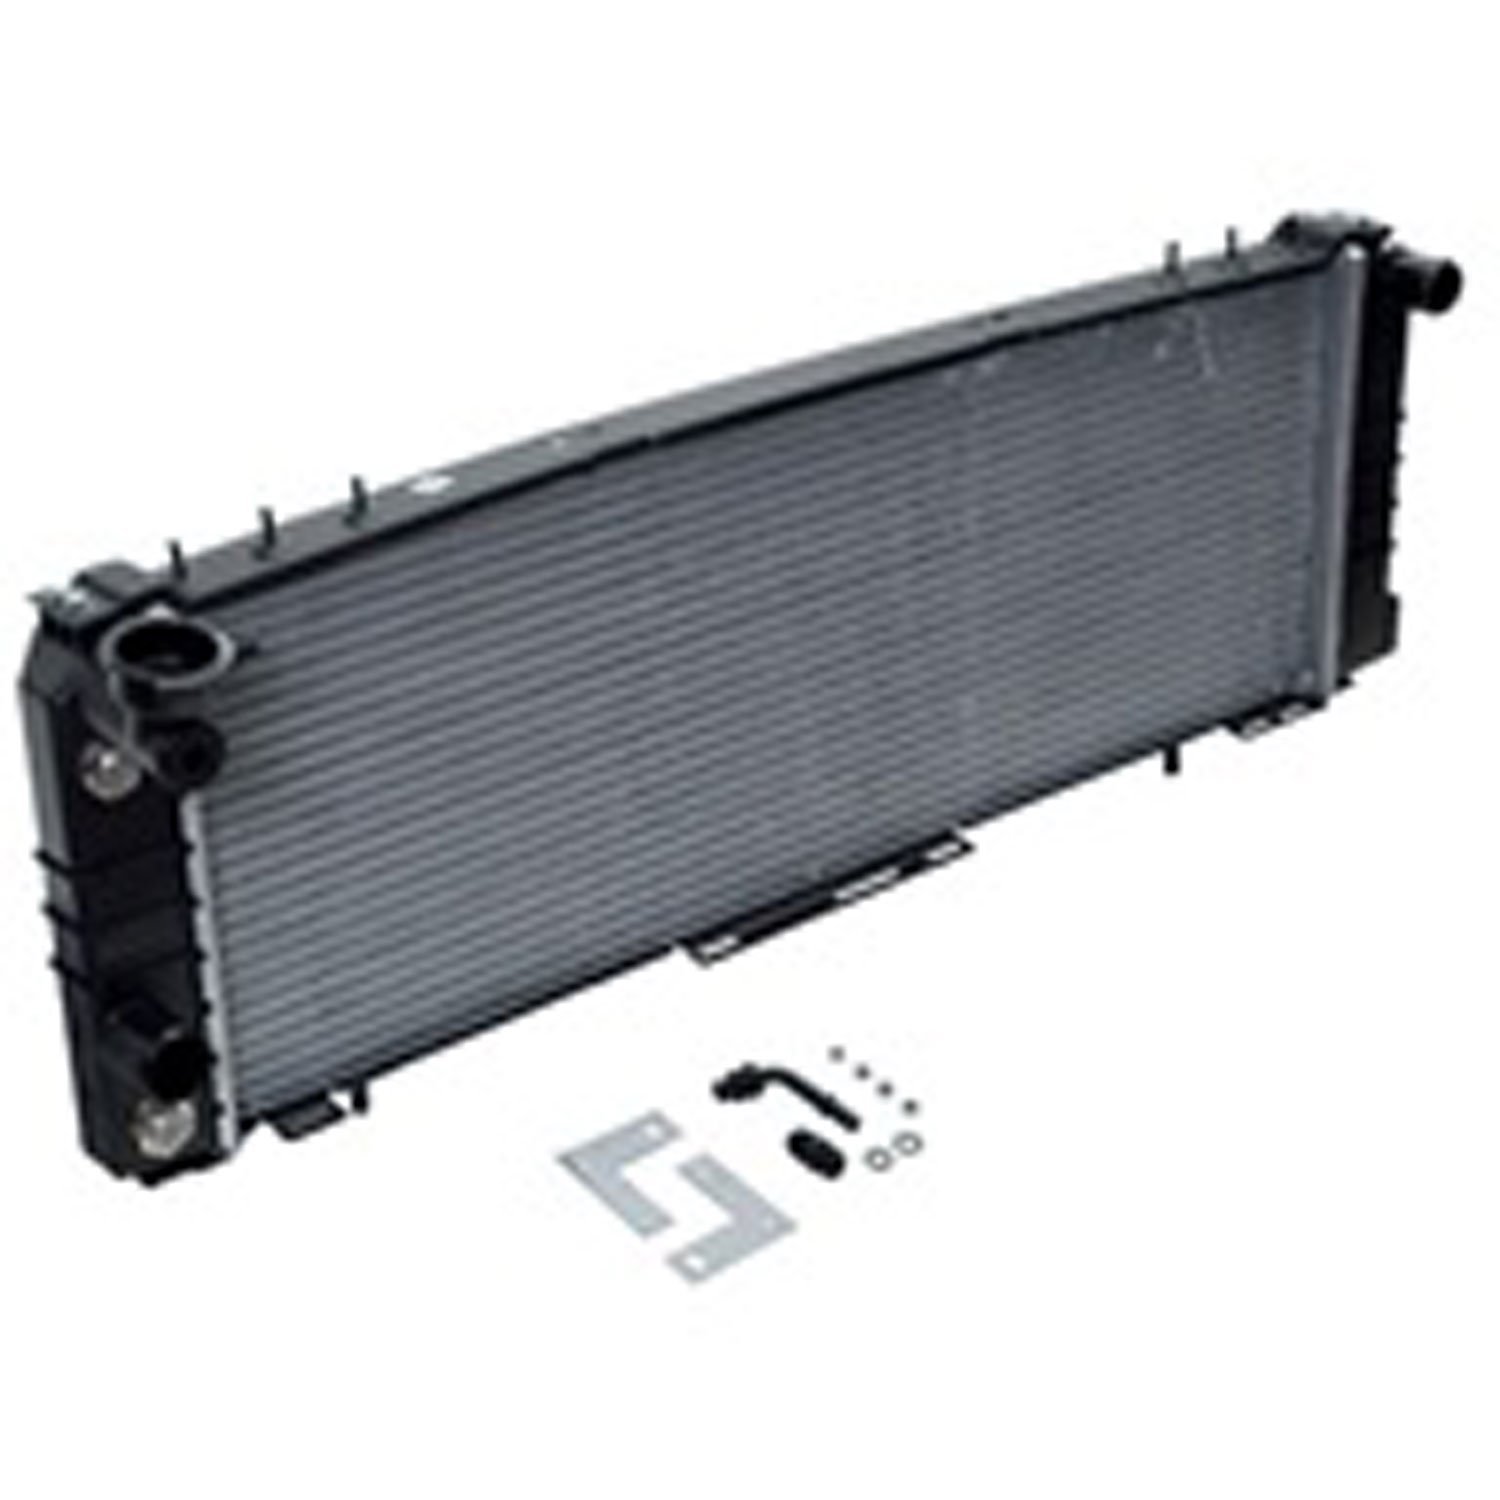 This 1 row radiator from Omix-ADA fits 91-01 Jeep Cherokees with a 2.5L and 4.0L engine. Fits manual